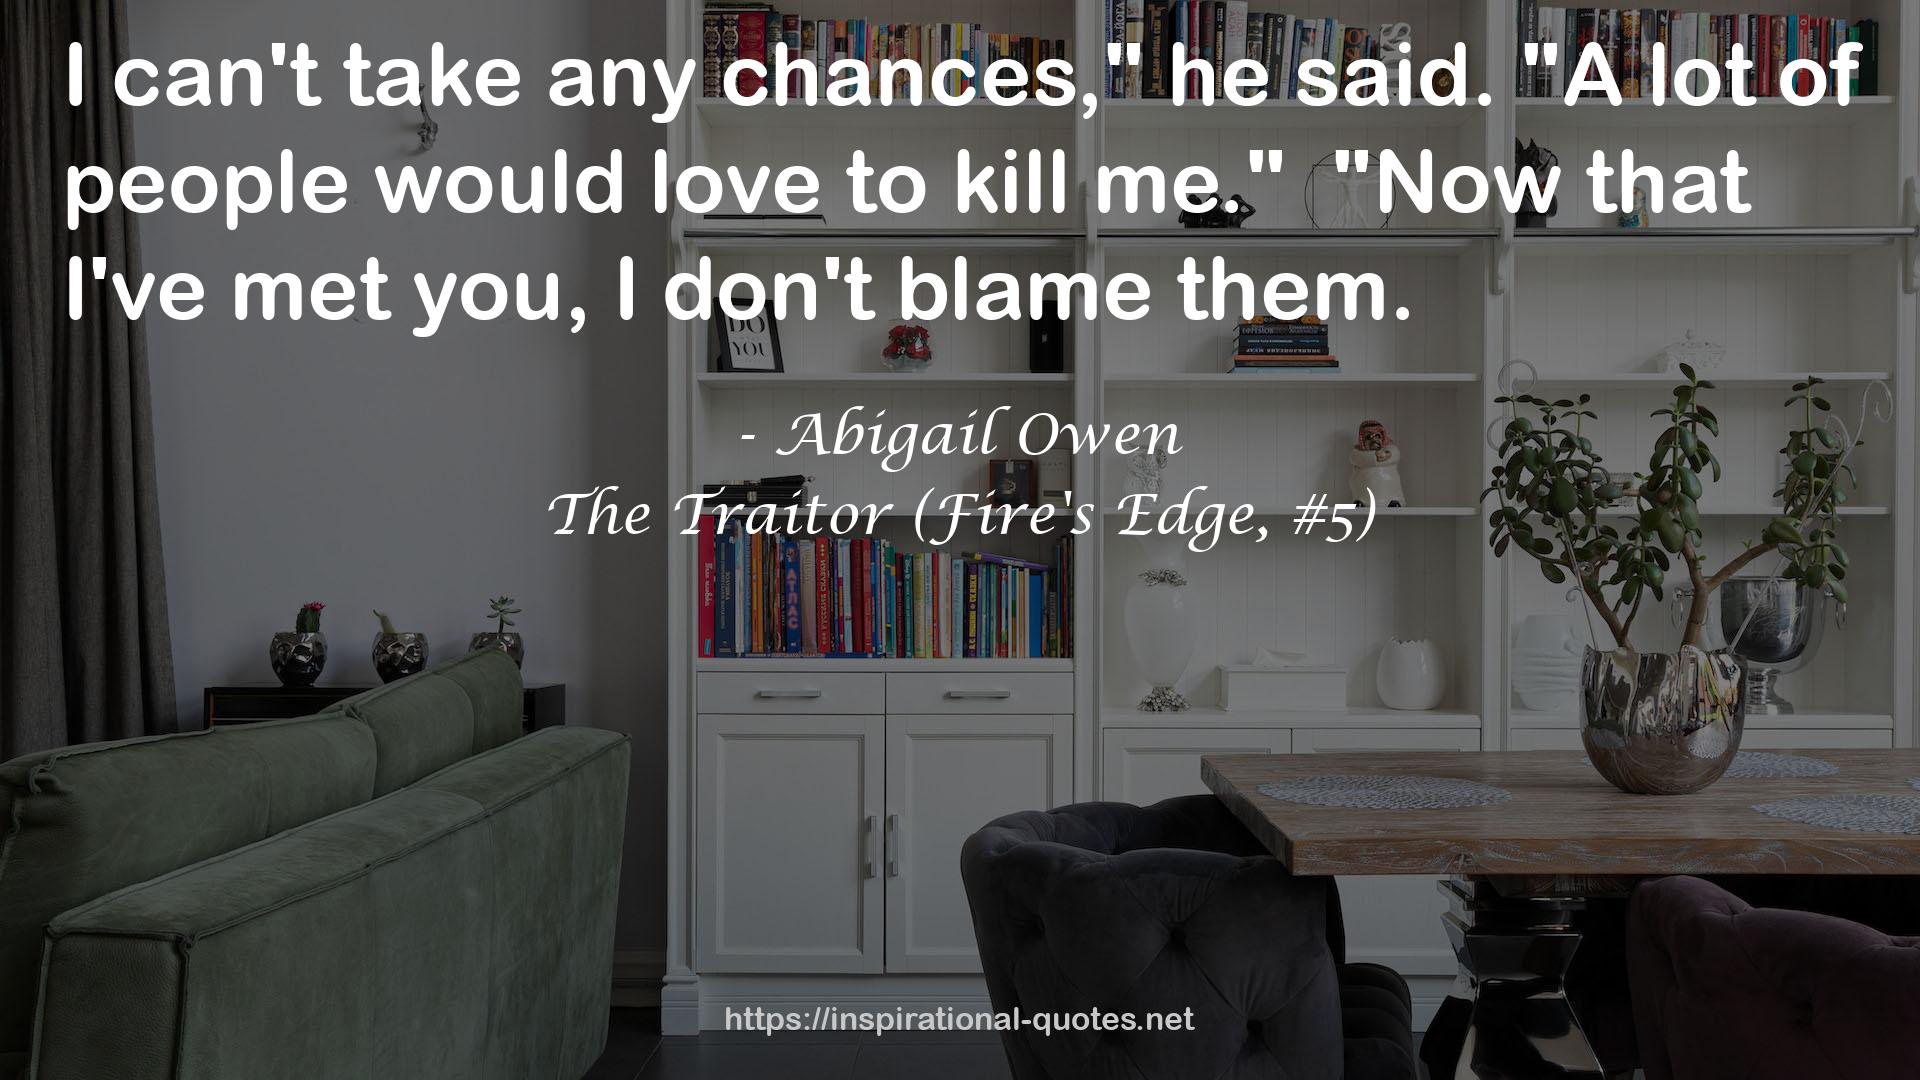 The Traitor (Fire's Edge, #5) QUOTES